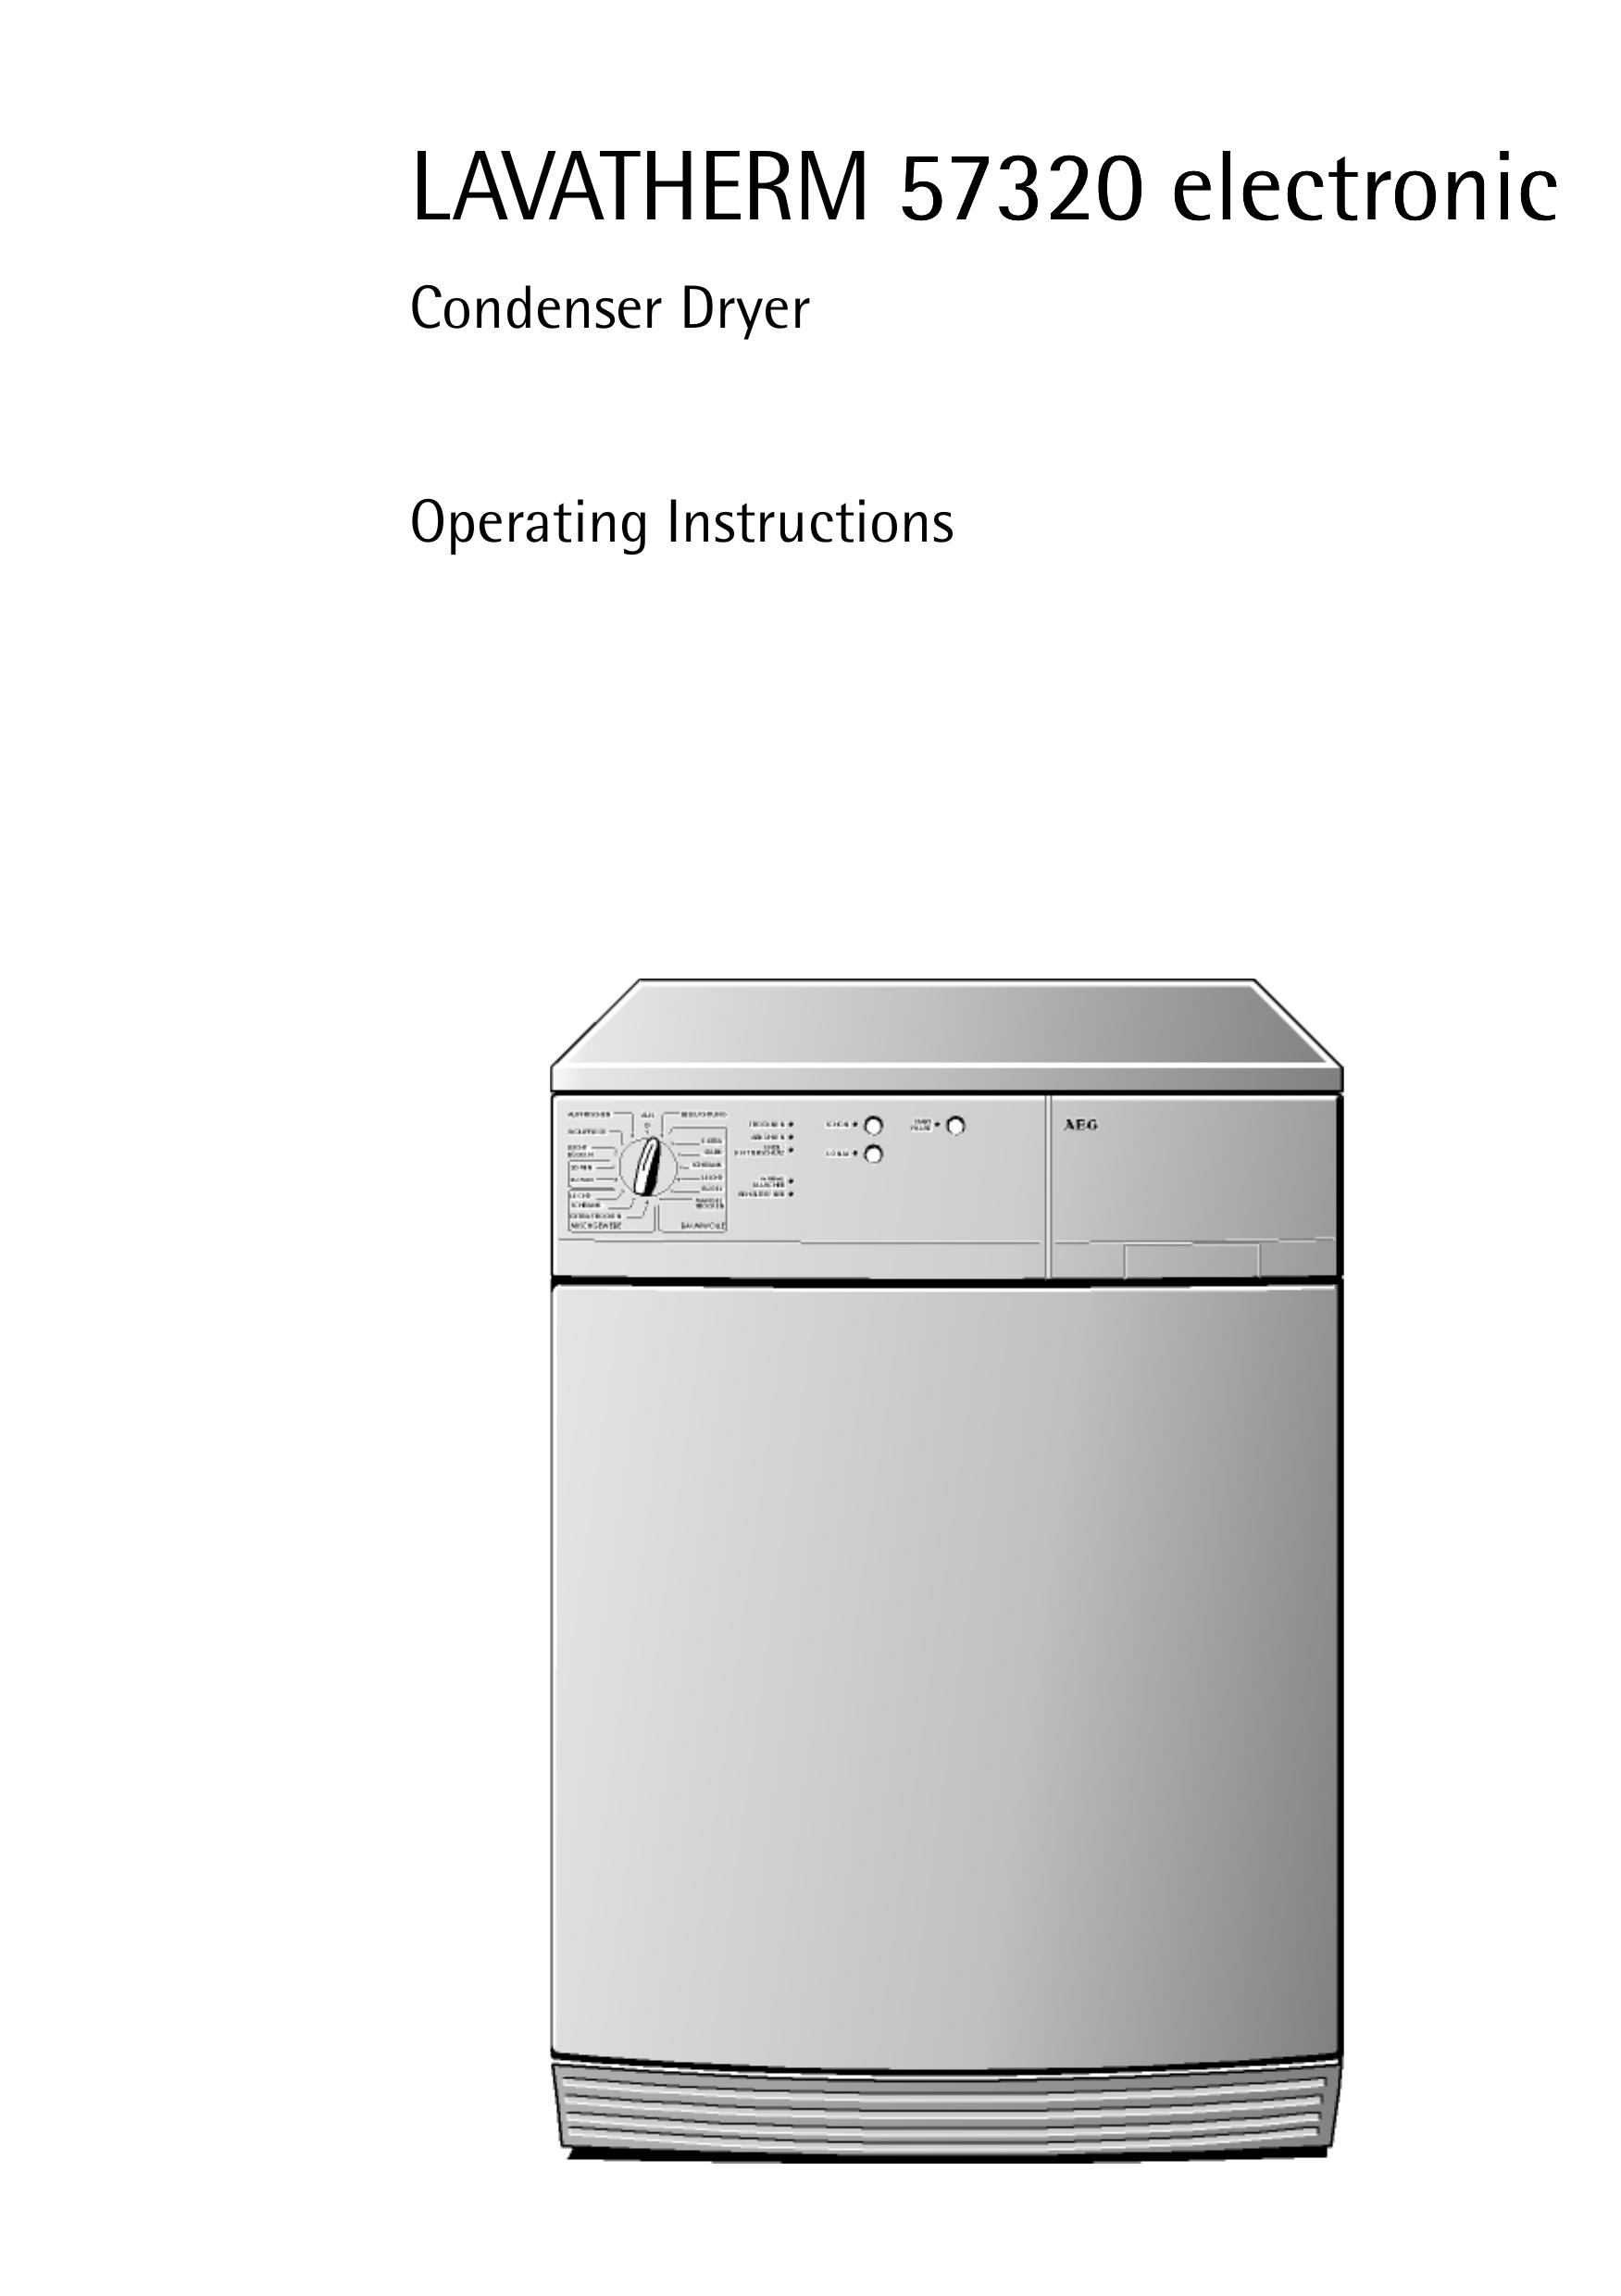 AEG 57320 Clothes Dryer User Manual (Page 1)